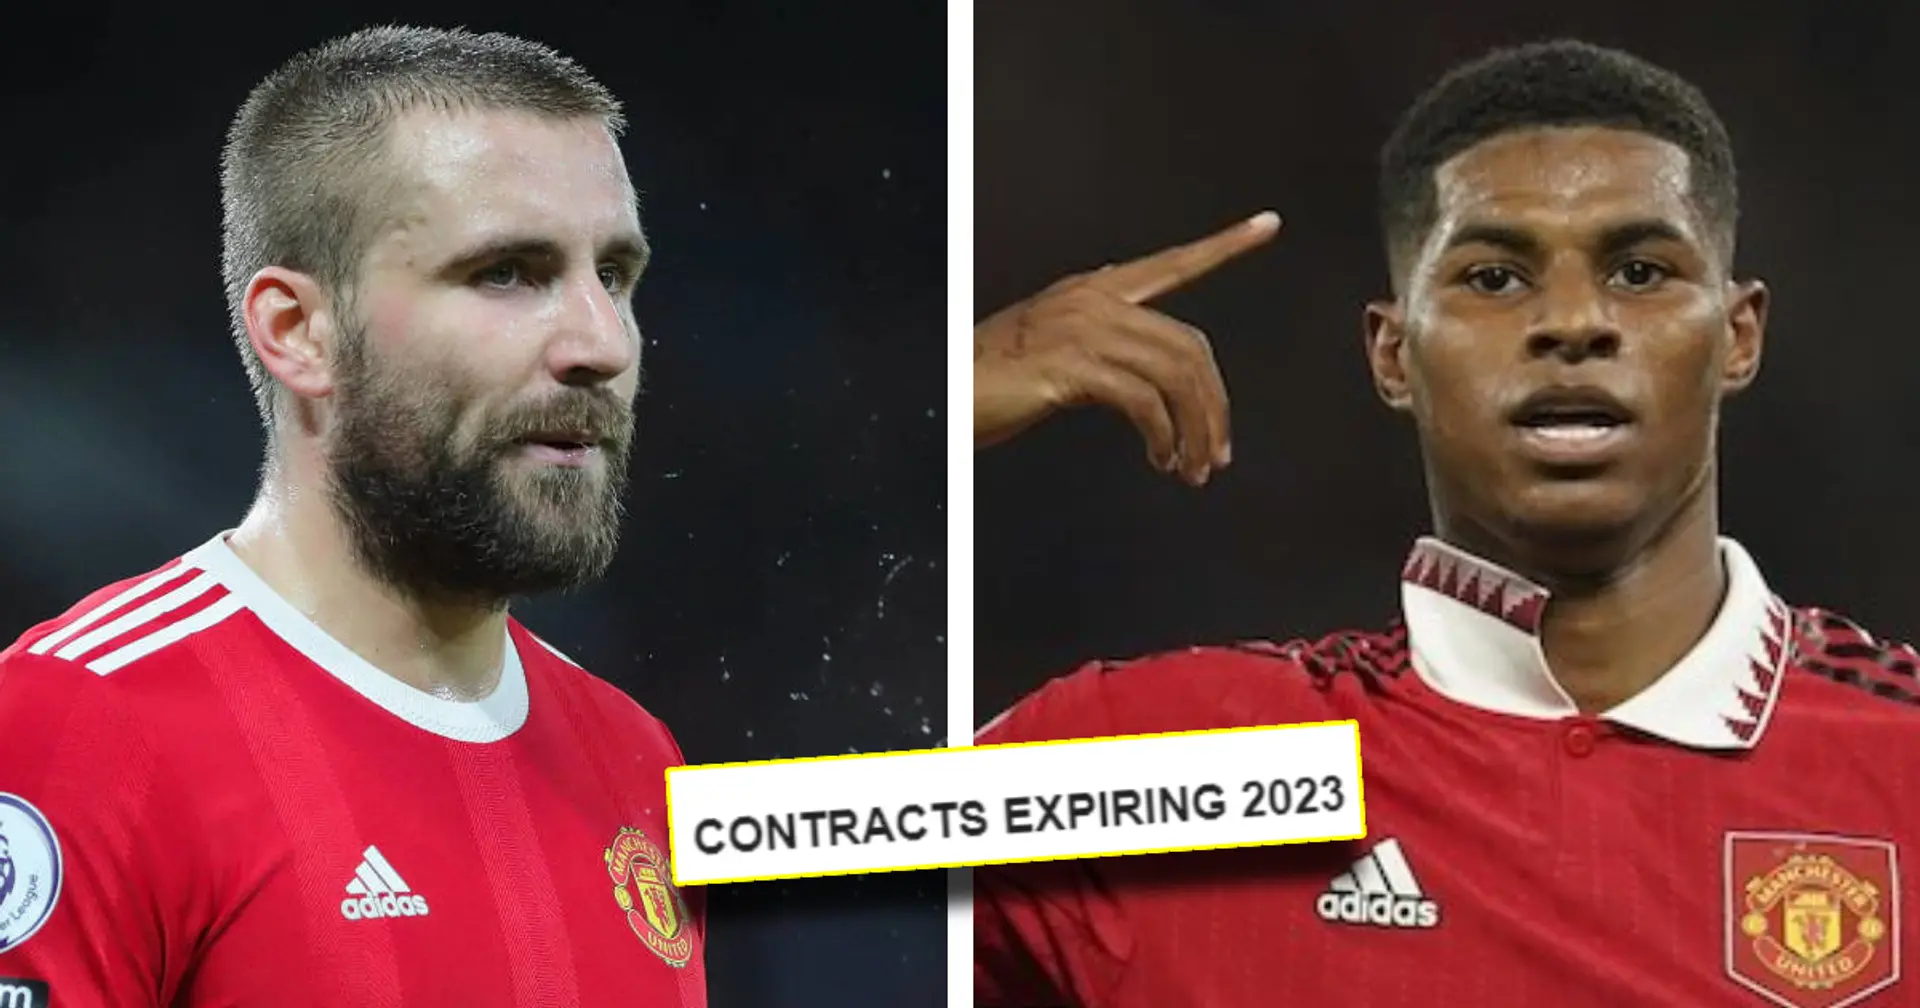 10 players who will be free to leave Man United next summer: Latest contract round-up